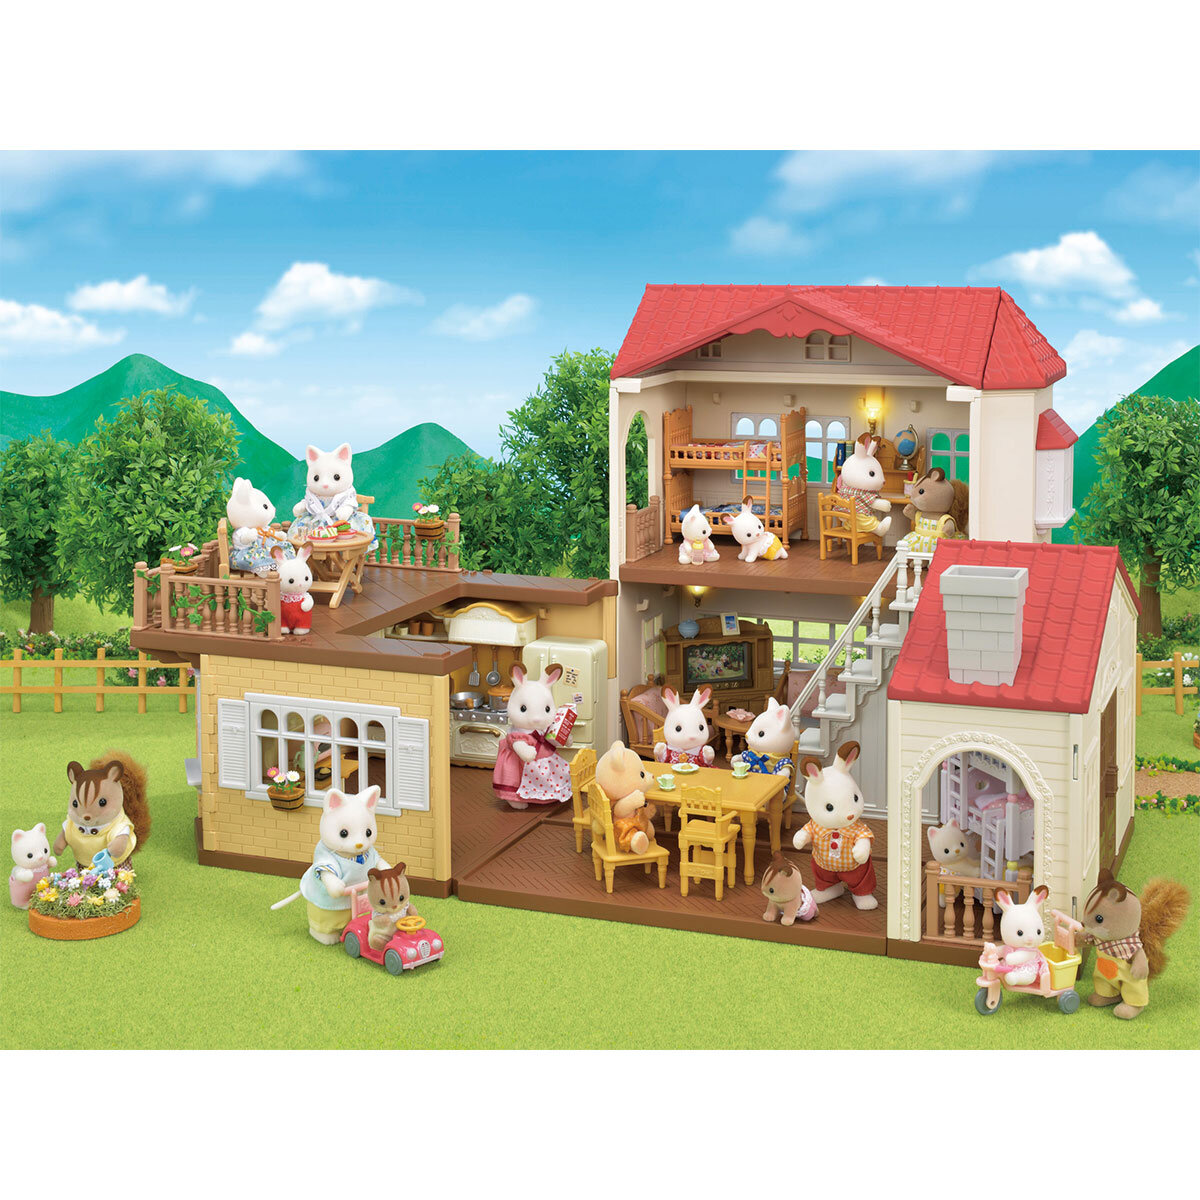 Buy Sylvanian Families Red Roof Country Home Overview Image at Costco.co.uk